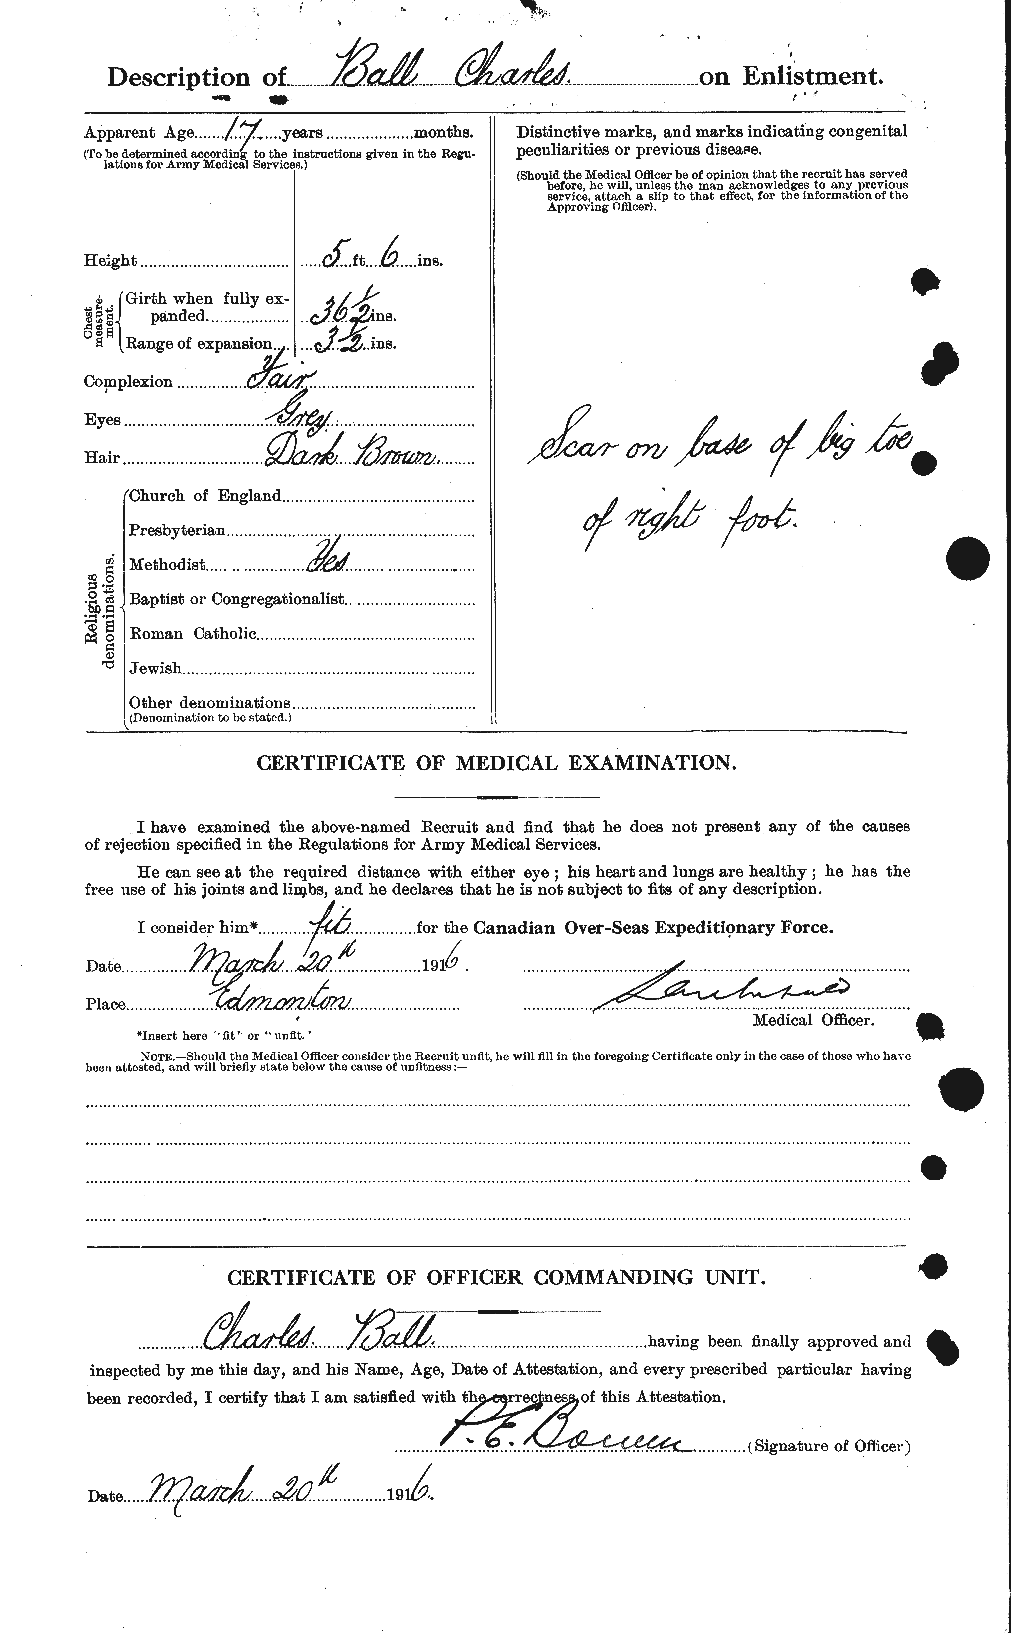 Personnel Records of the First World War - CEF 225863b